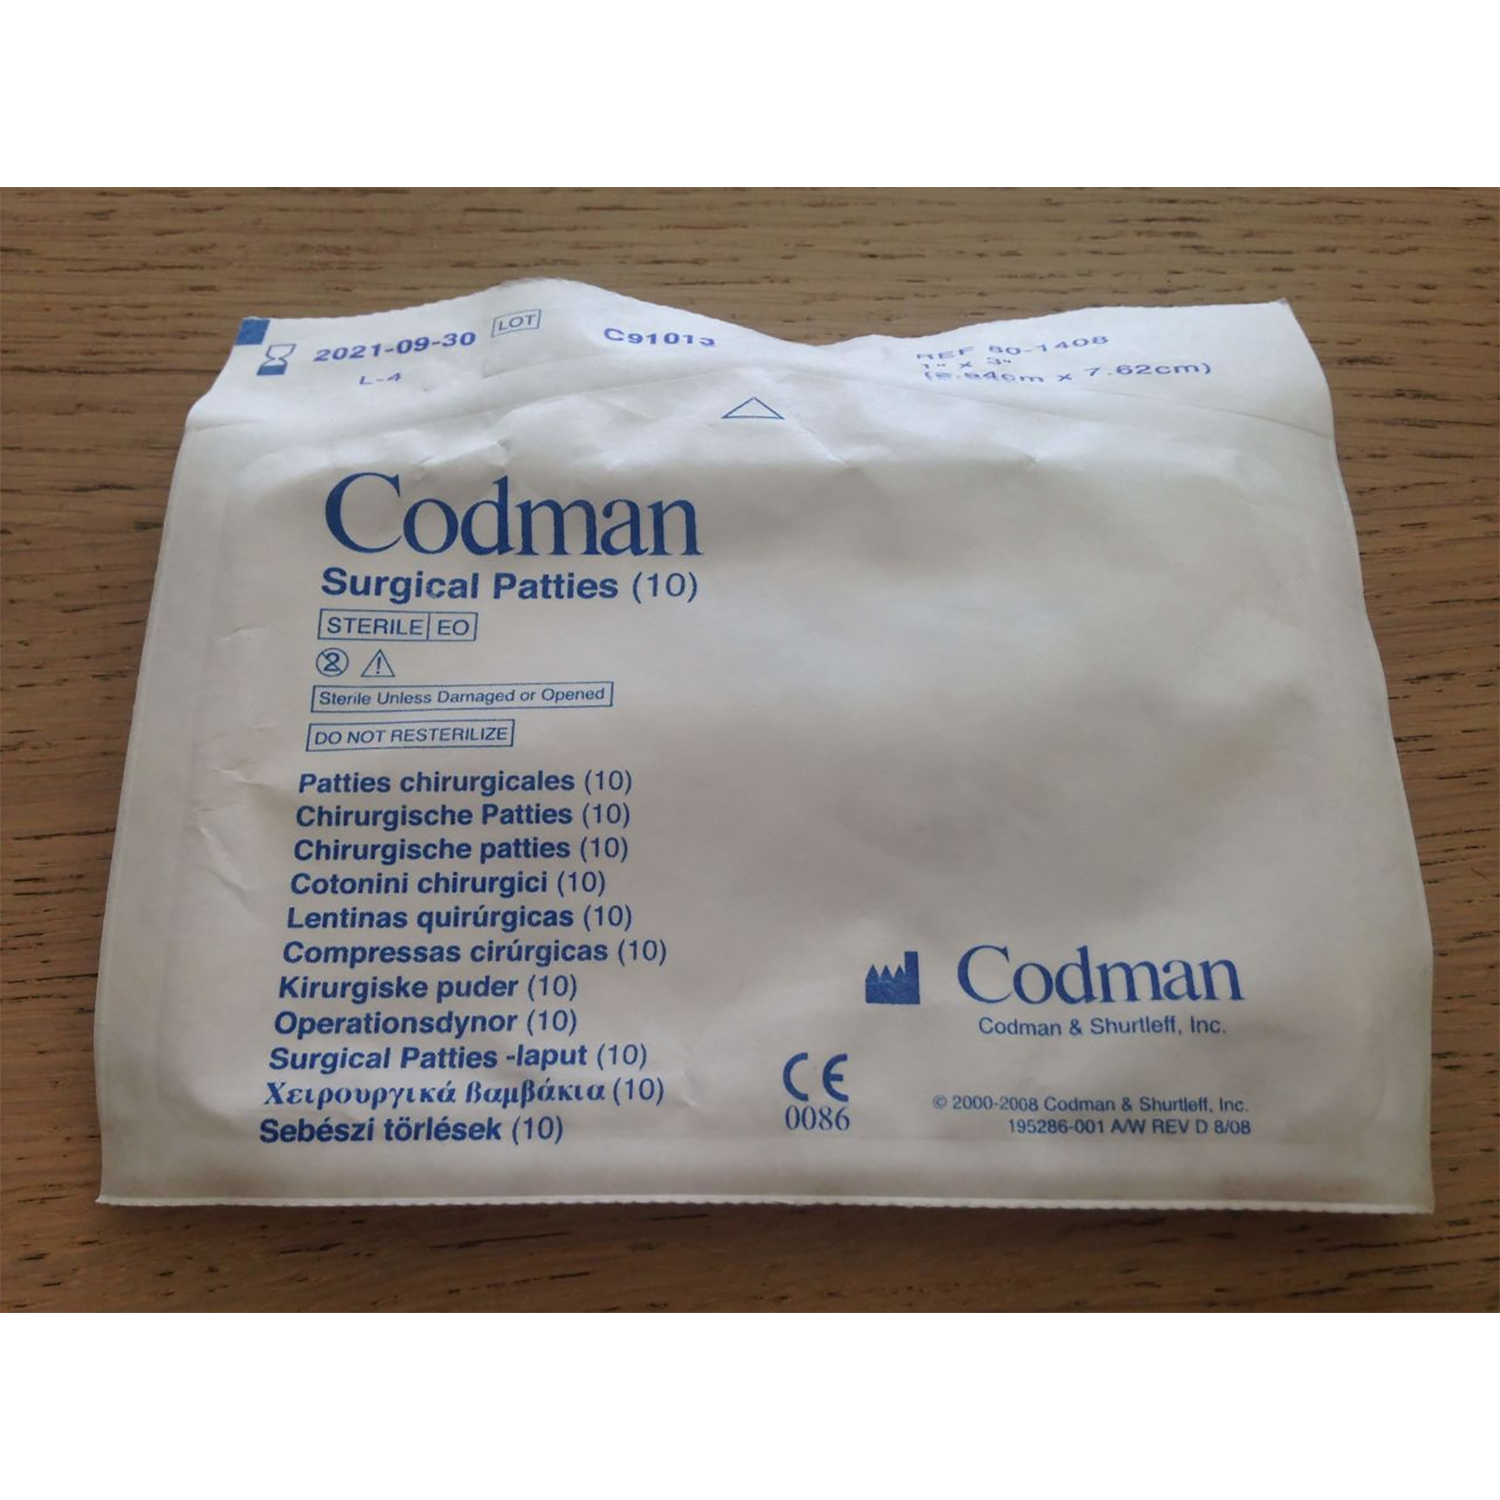 Codman Surgical Patties | 2.54 x 7.62cm | Pack of 200 (20 Packages per Dispenser Box x 10 Boxes)